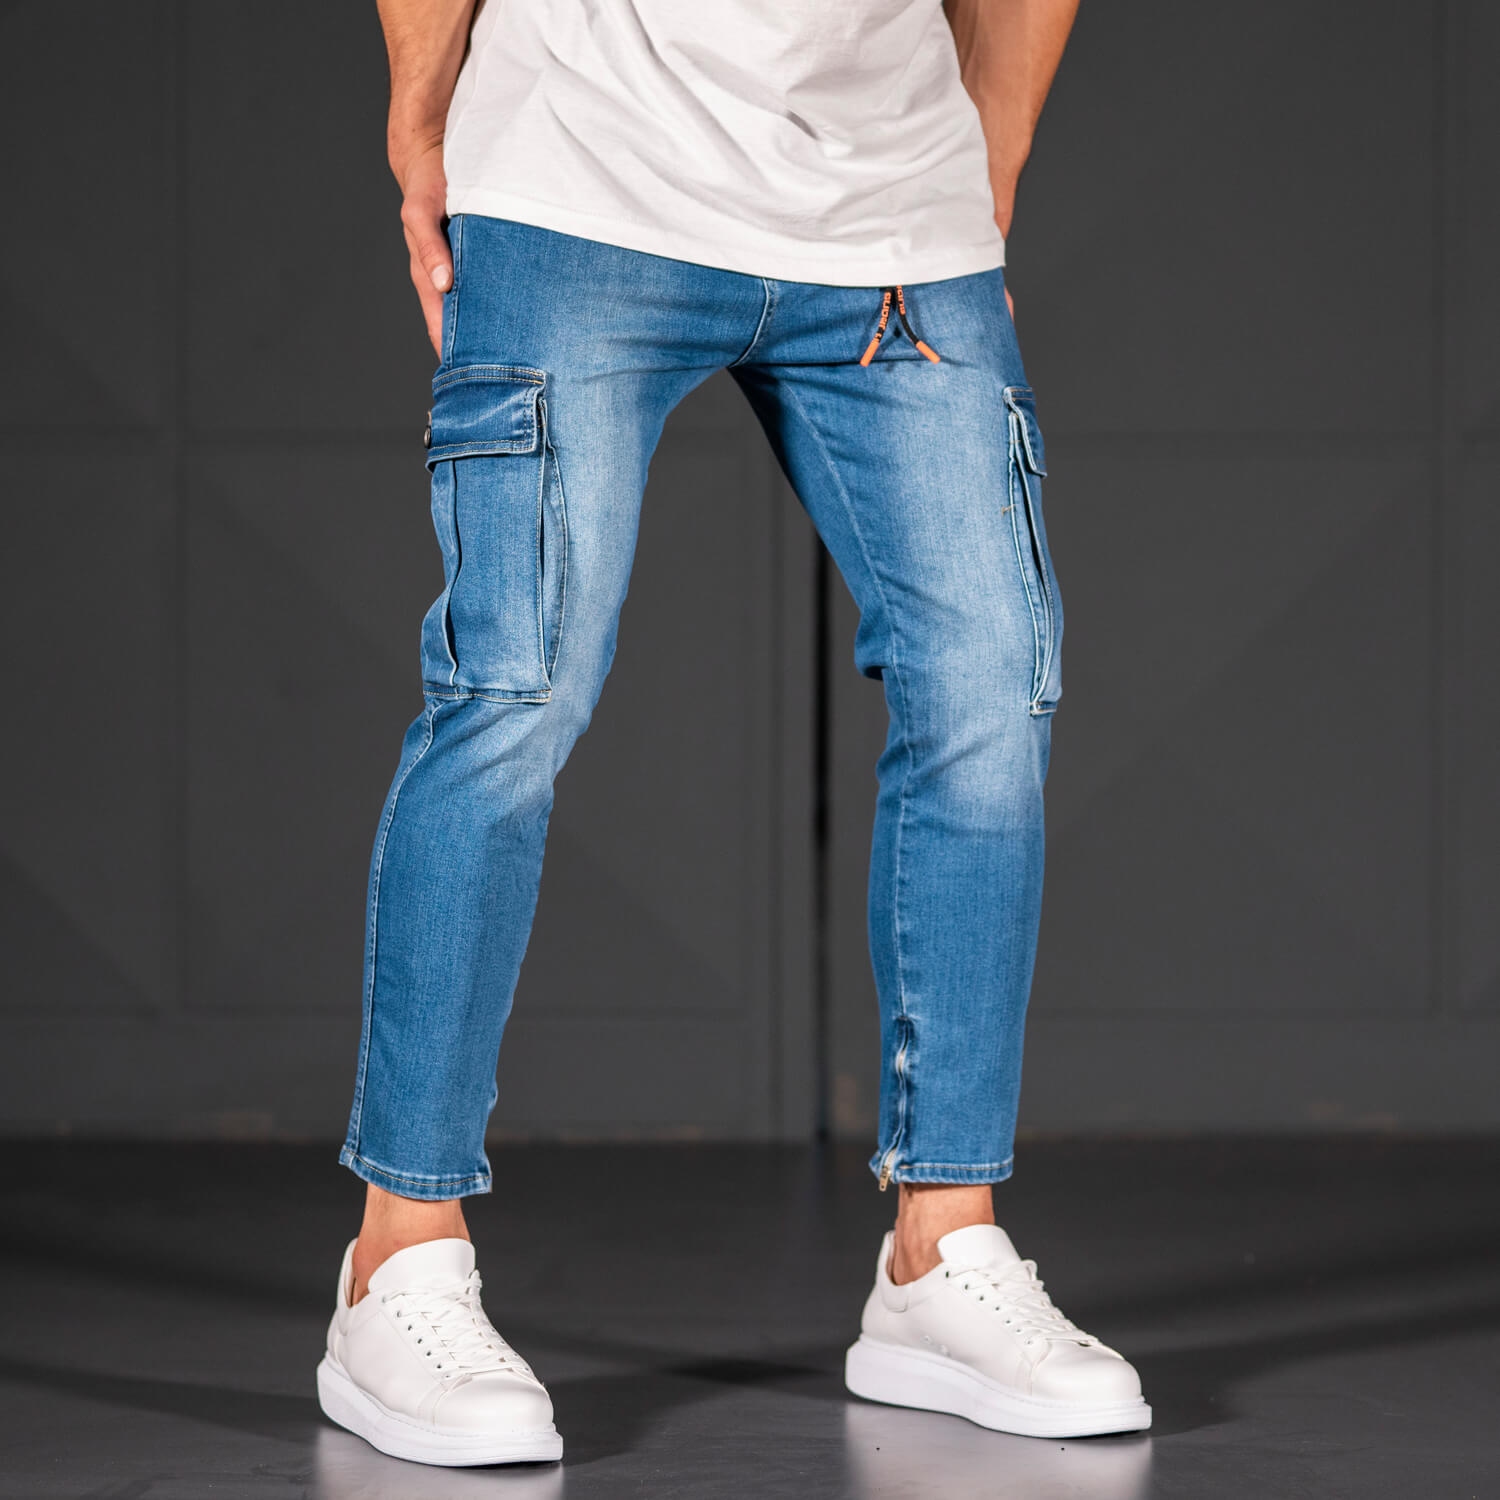 jeans pent style 2018 price